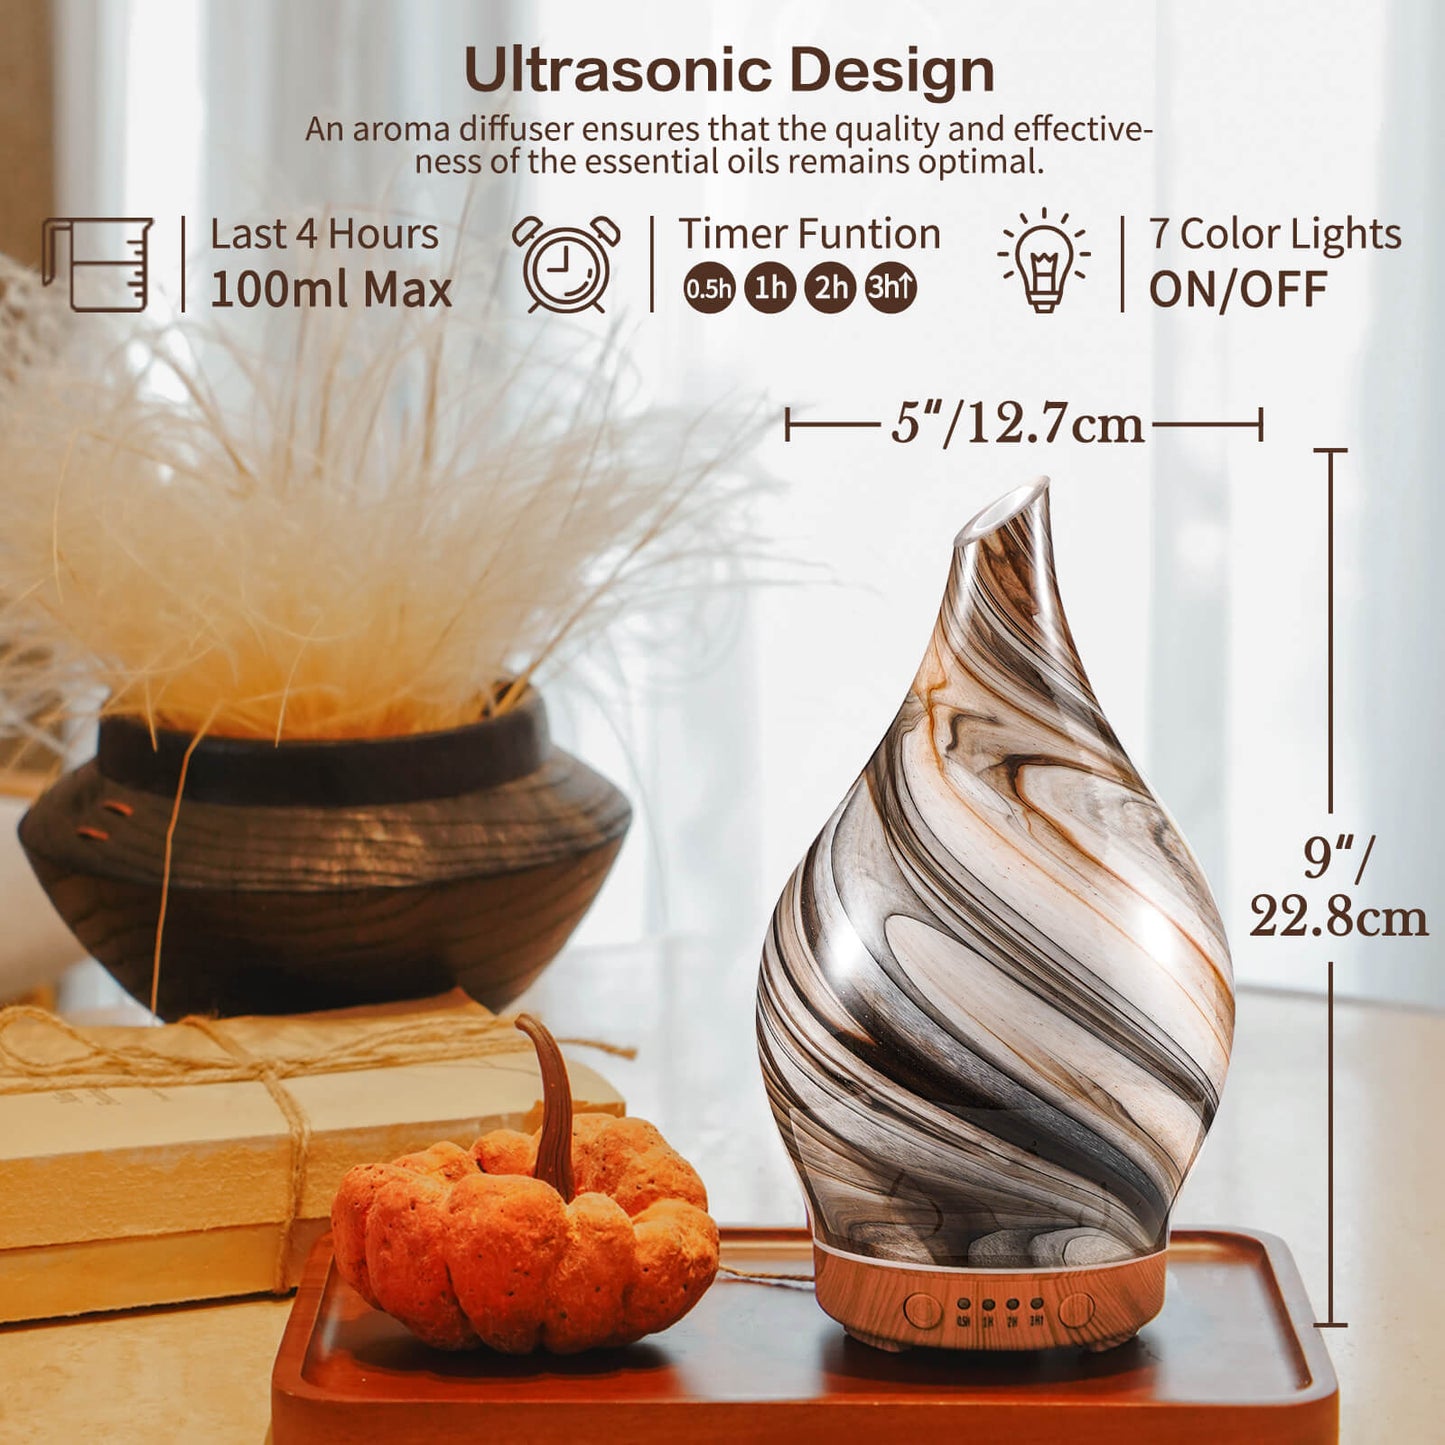 Porseme 100ml Glass Essential Oil Diffuser Aromatherapy Ultrasonic Cool Mist Humidifier 4 Running Hours Waterless Auto-Off Air Diffusers for Sleeping,Yoga,Office Working Spa and Rest (Deep Desert)